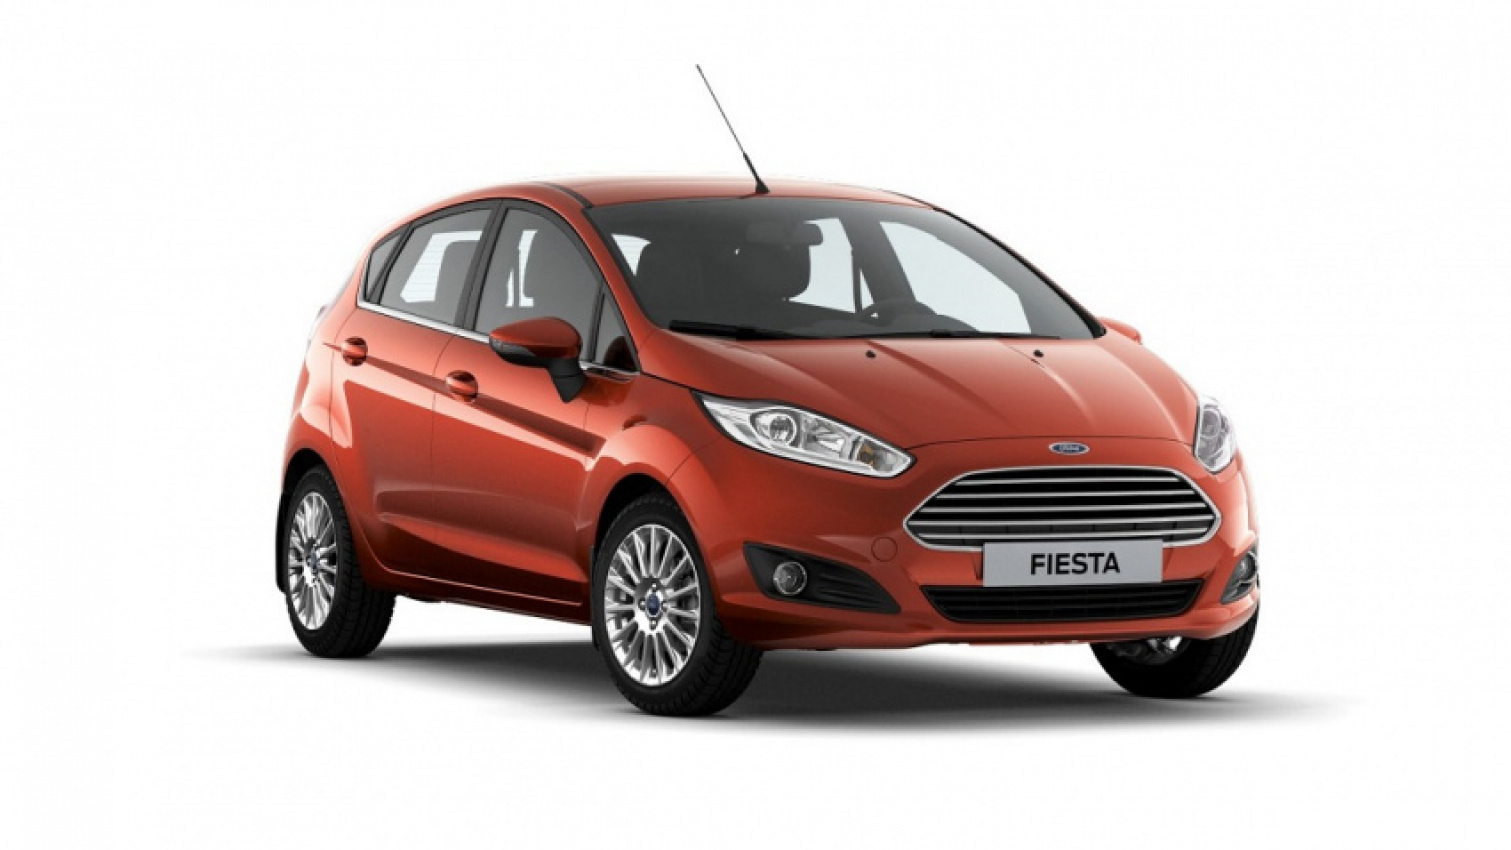 autos, car brands, cars, ford, ford fiesta, sdac, cash rebates and low repayments for selected ford fiesta and ecosport models